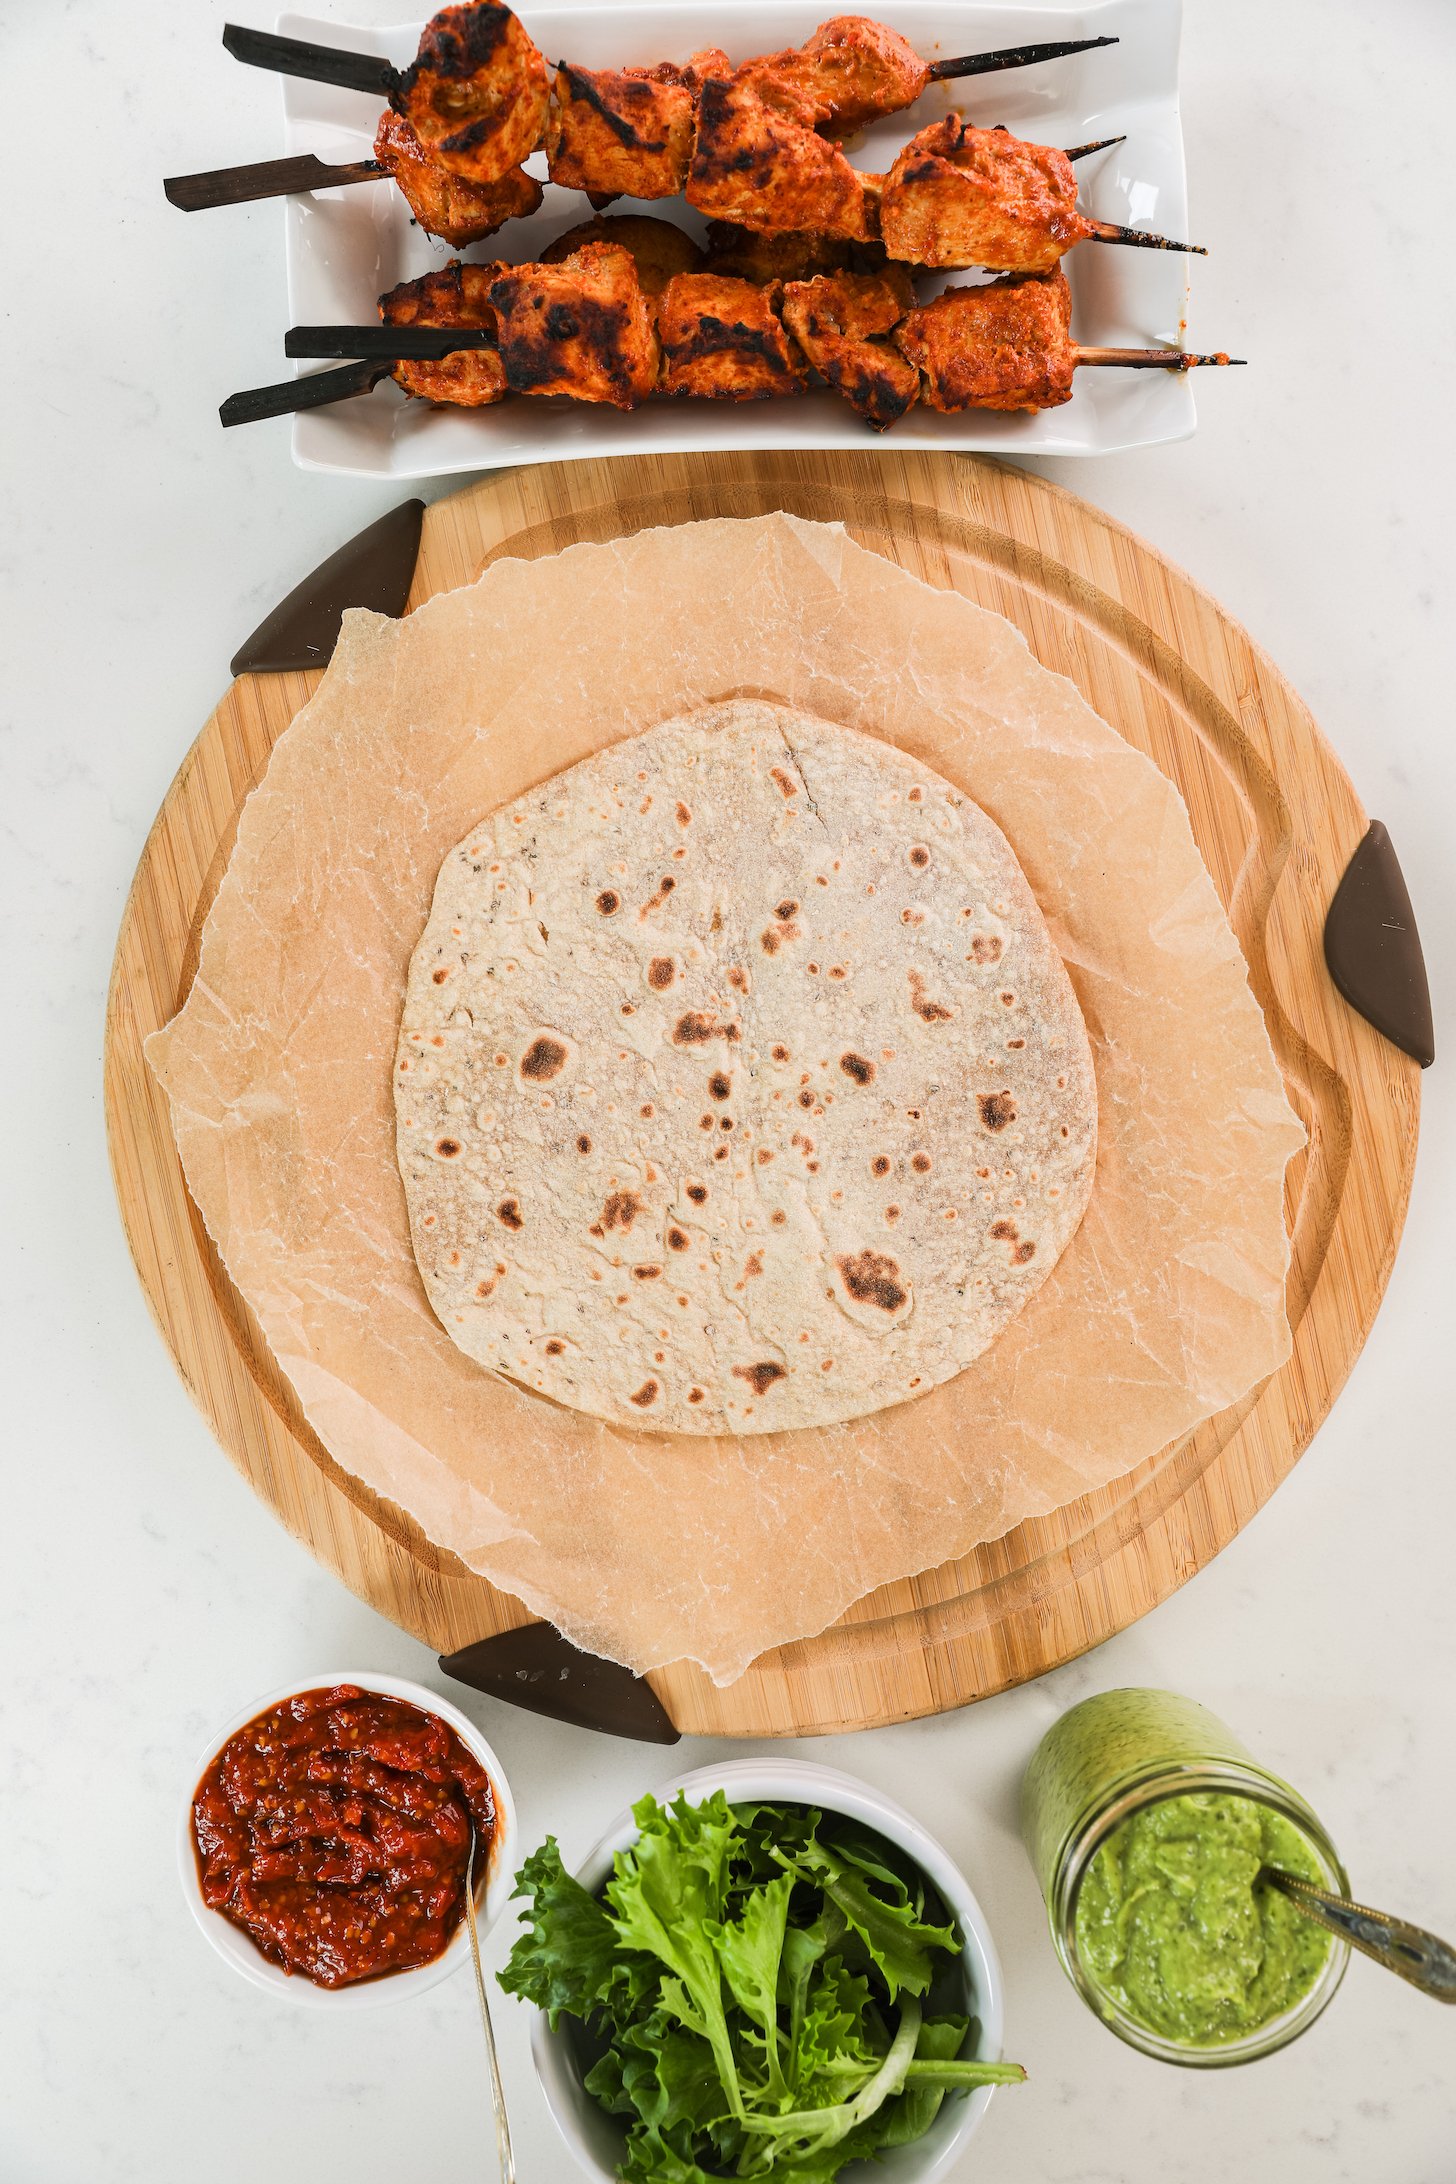 A roti with tandoori chicken skewers, sauces and salad greens nearby.